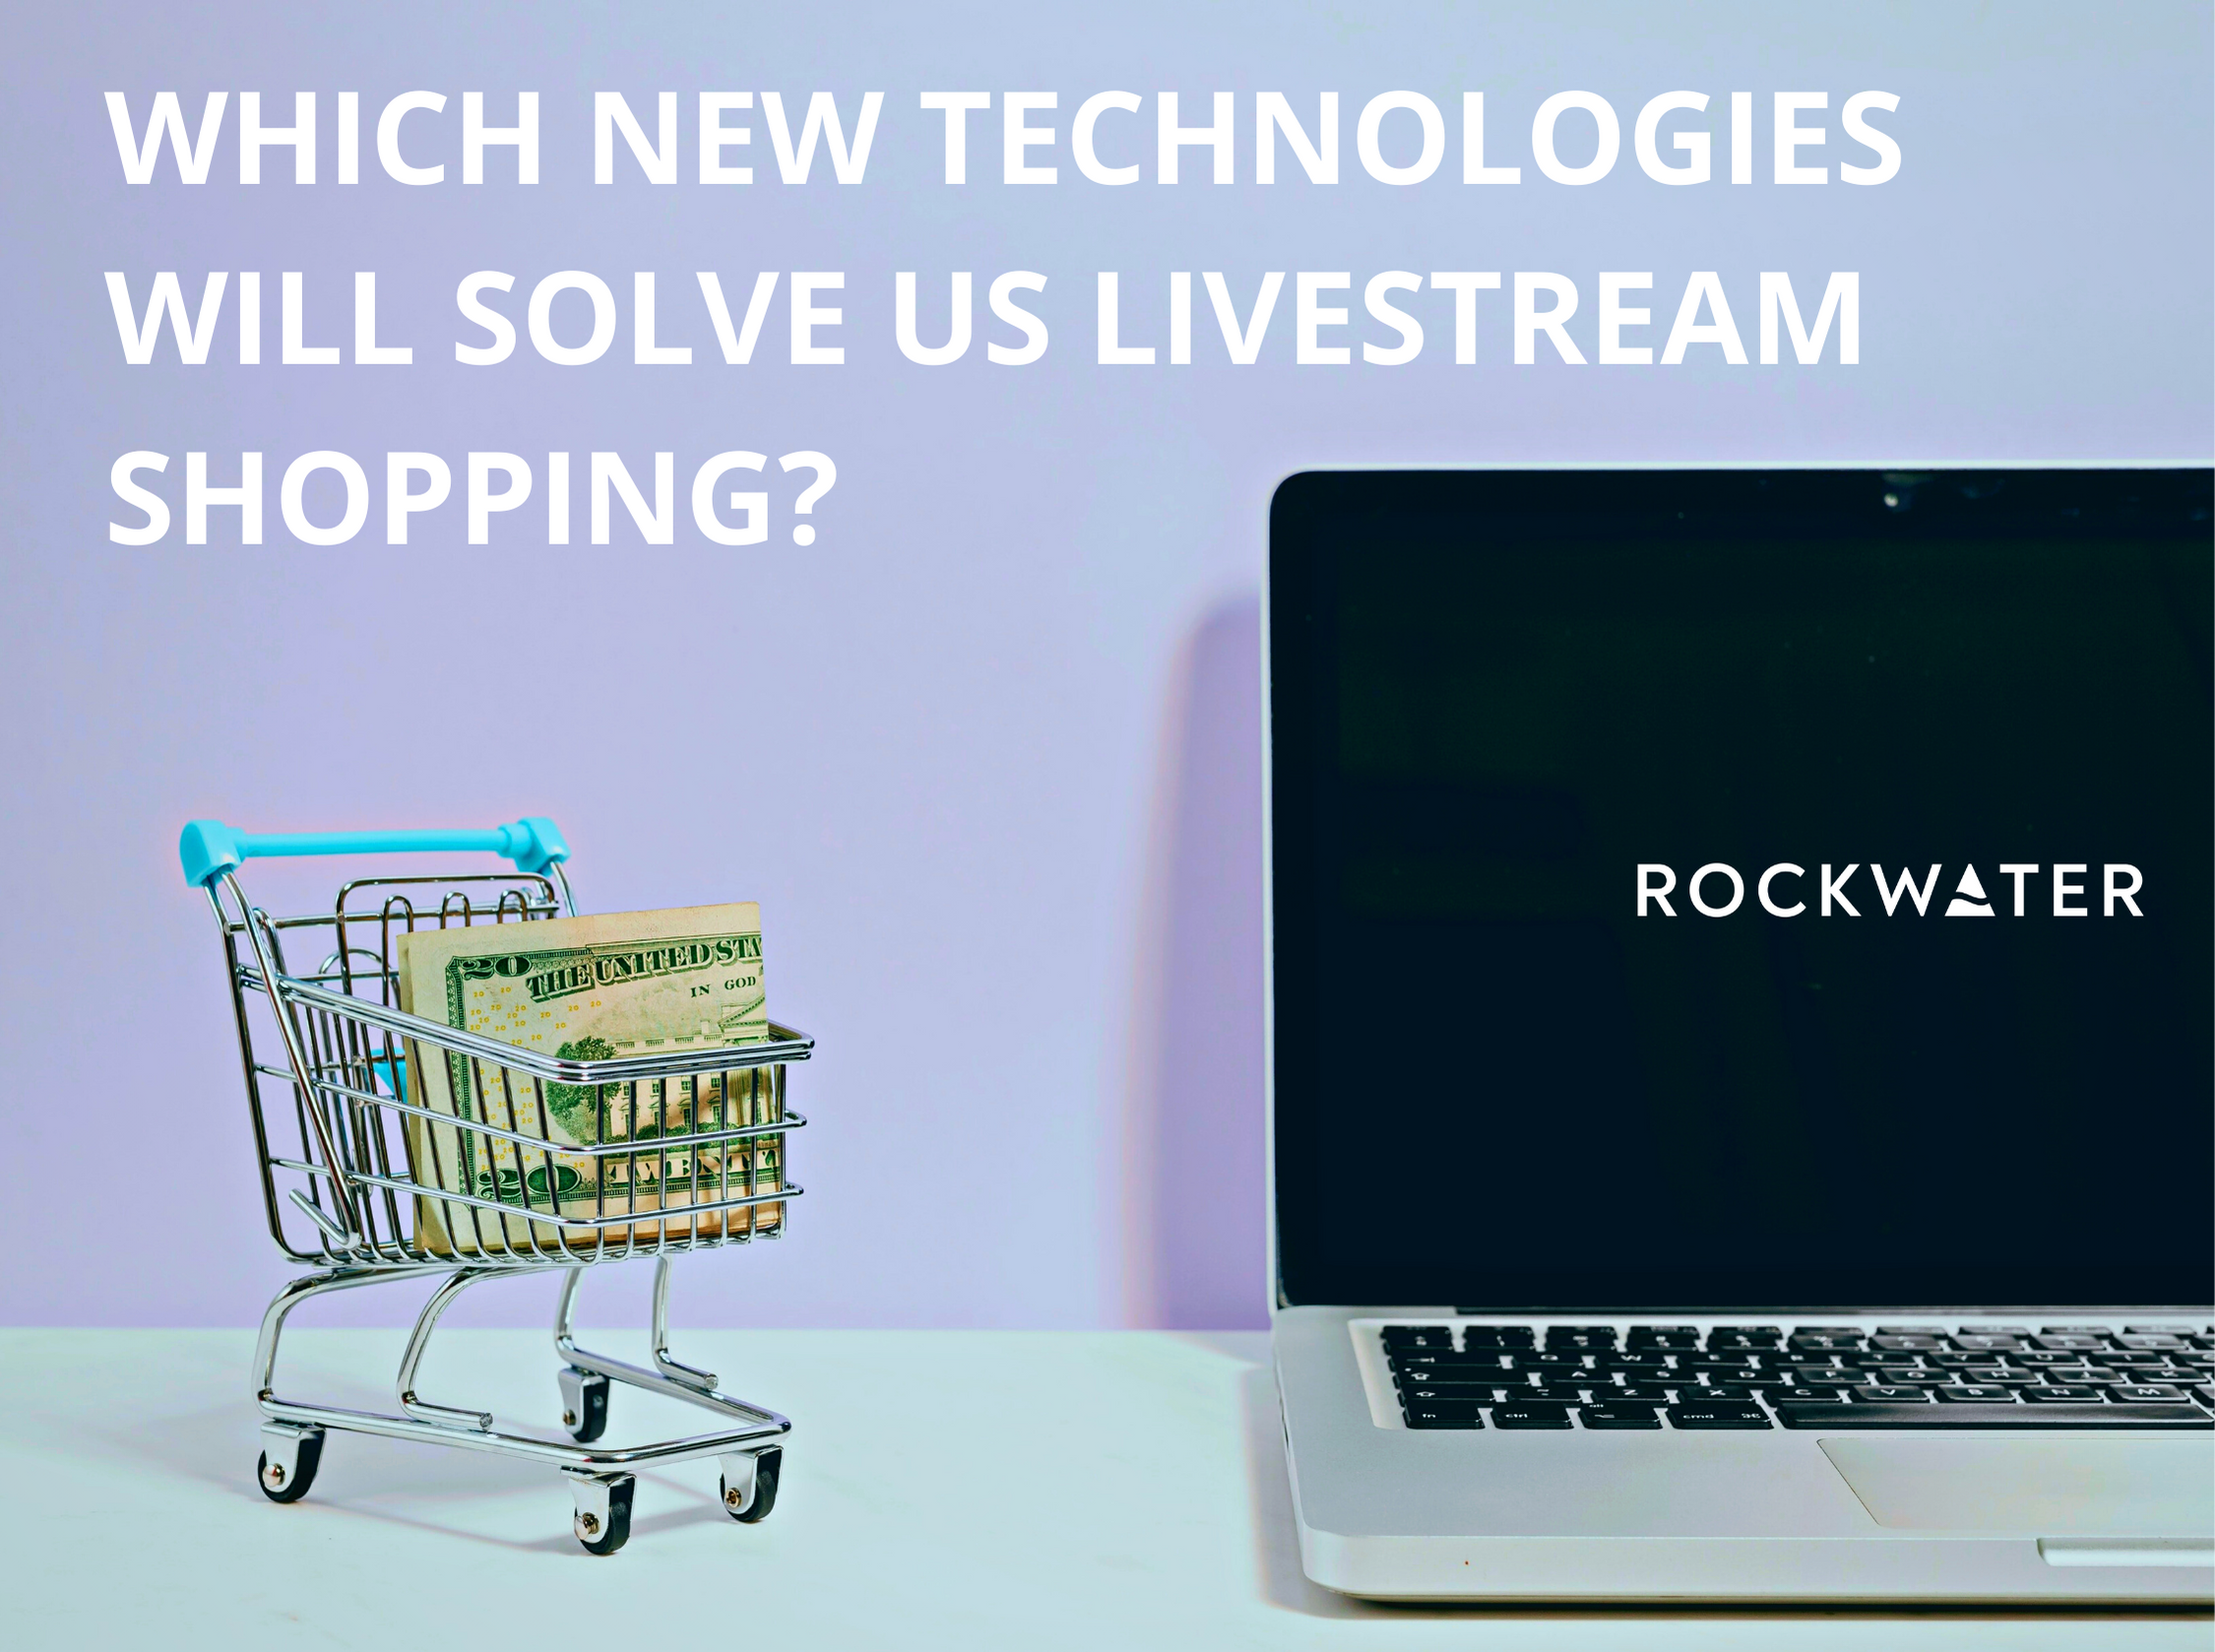 What New Tech Will Solve the Challenges for US Livestream Shopping?